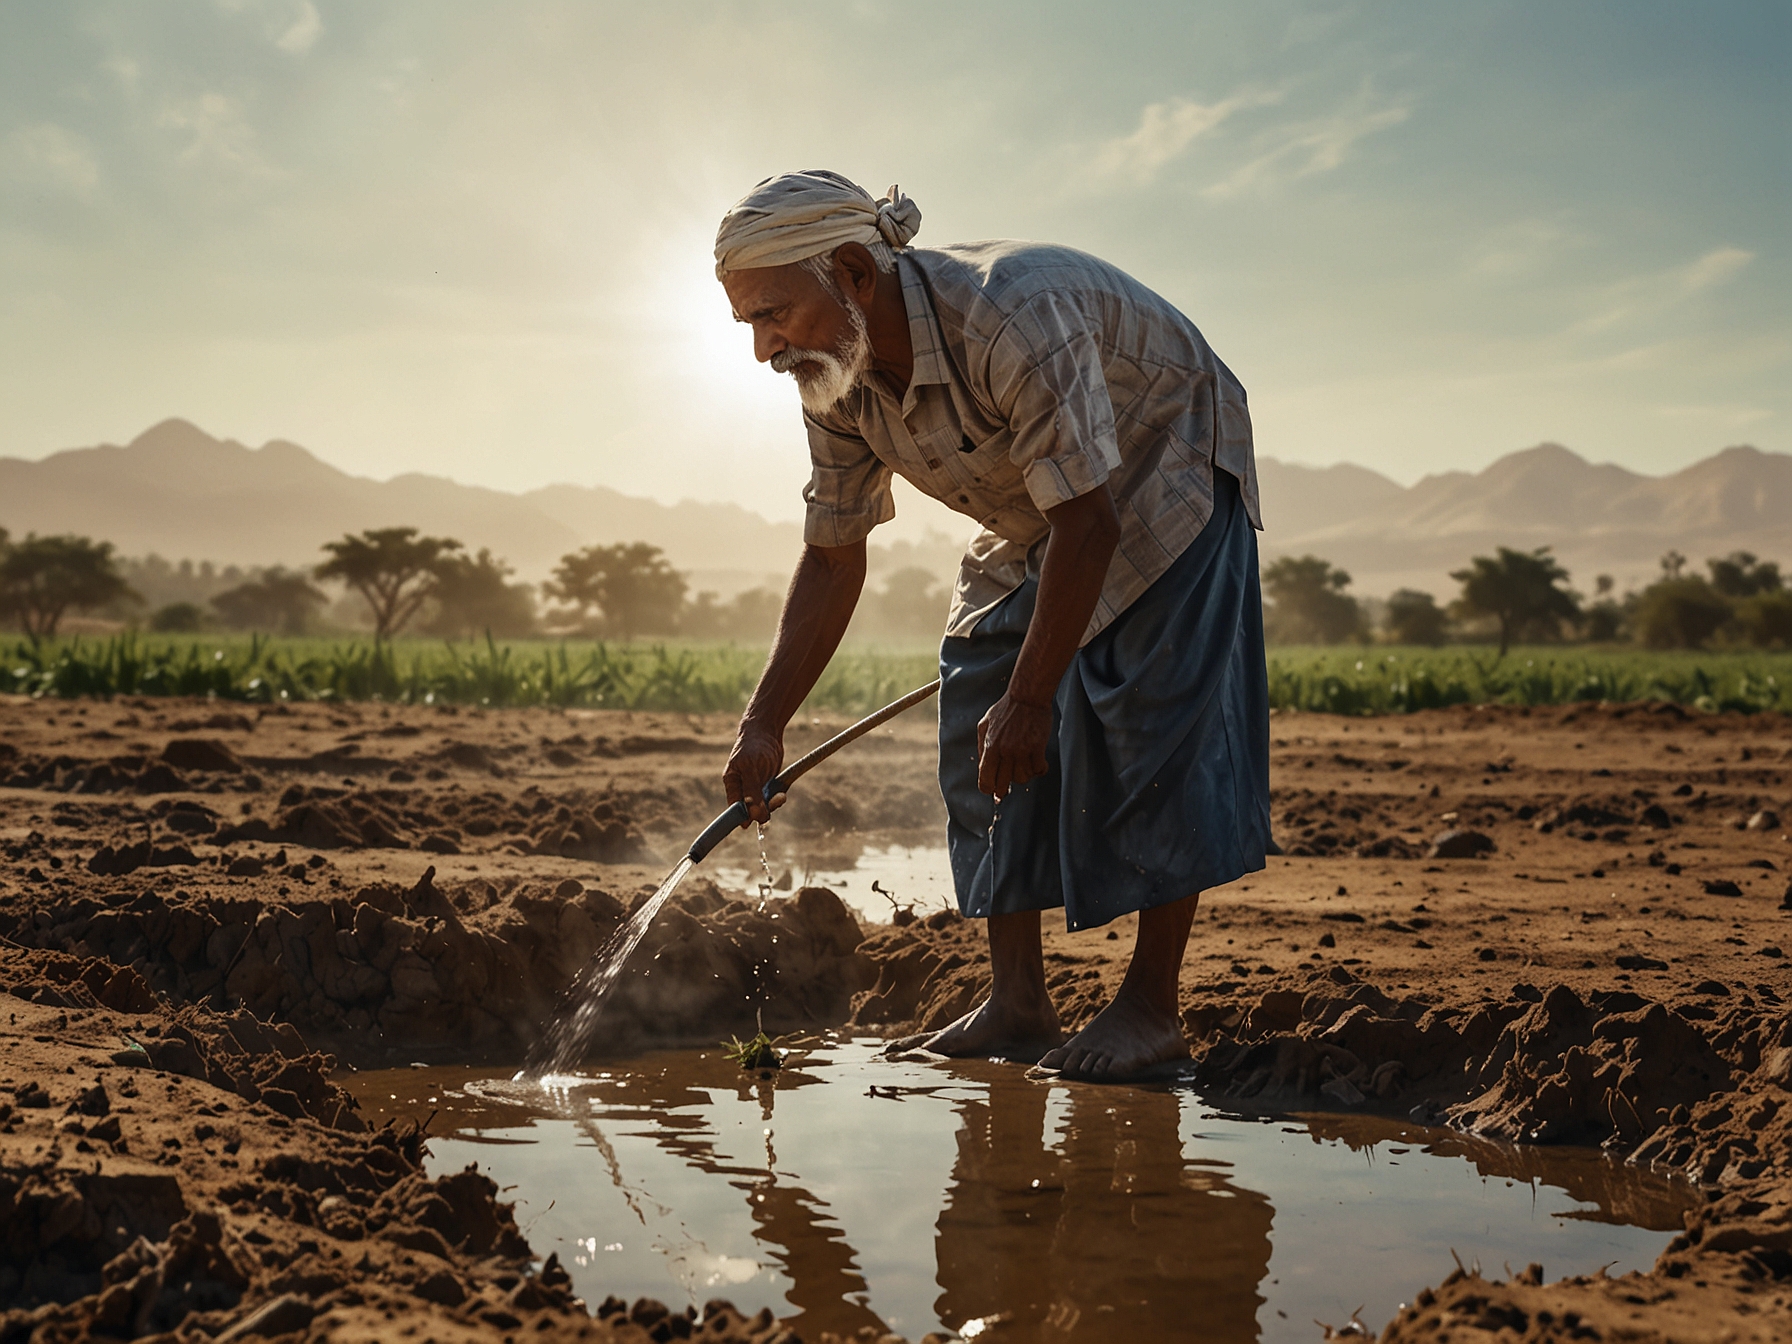 An Indian farmer using modern irrigation techniques in a drought-prone area, highlighting the critical issue of water scarcity and the importance of efficient water management policies.